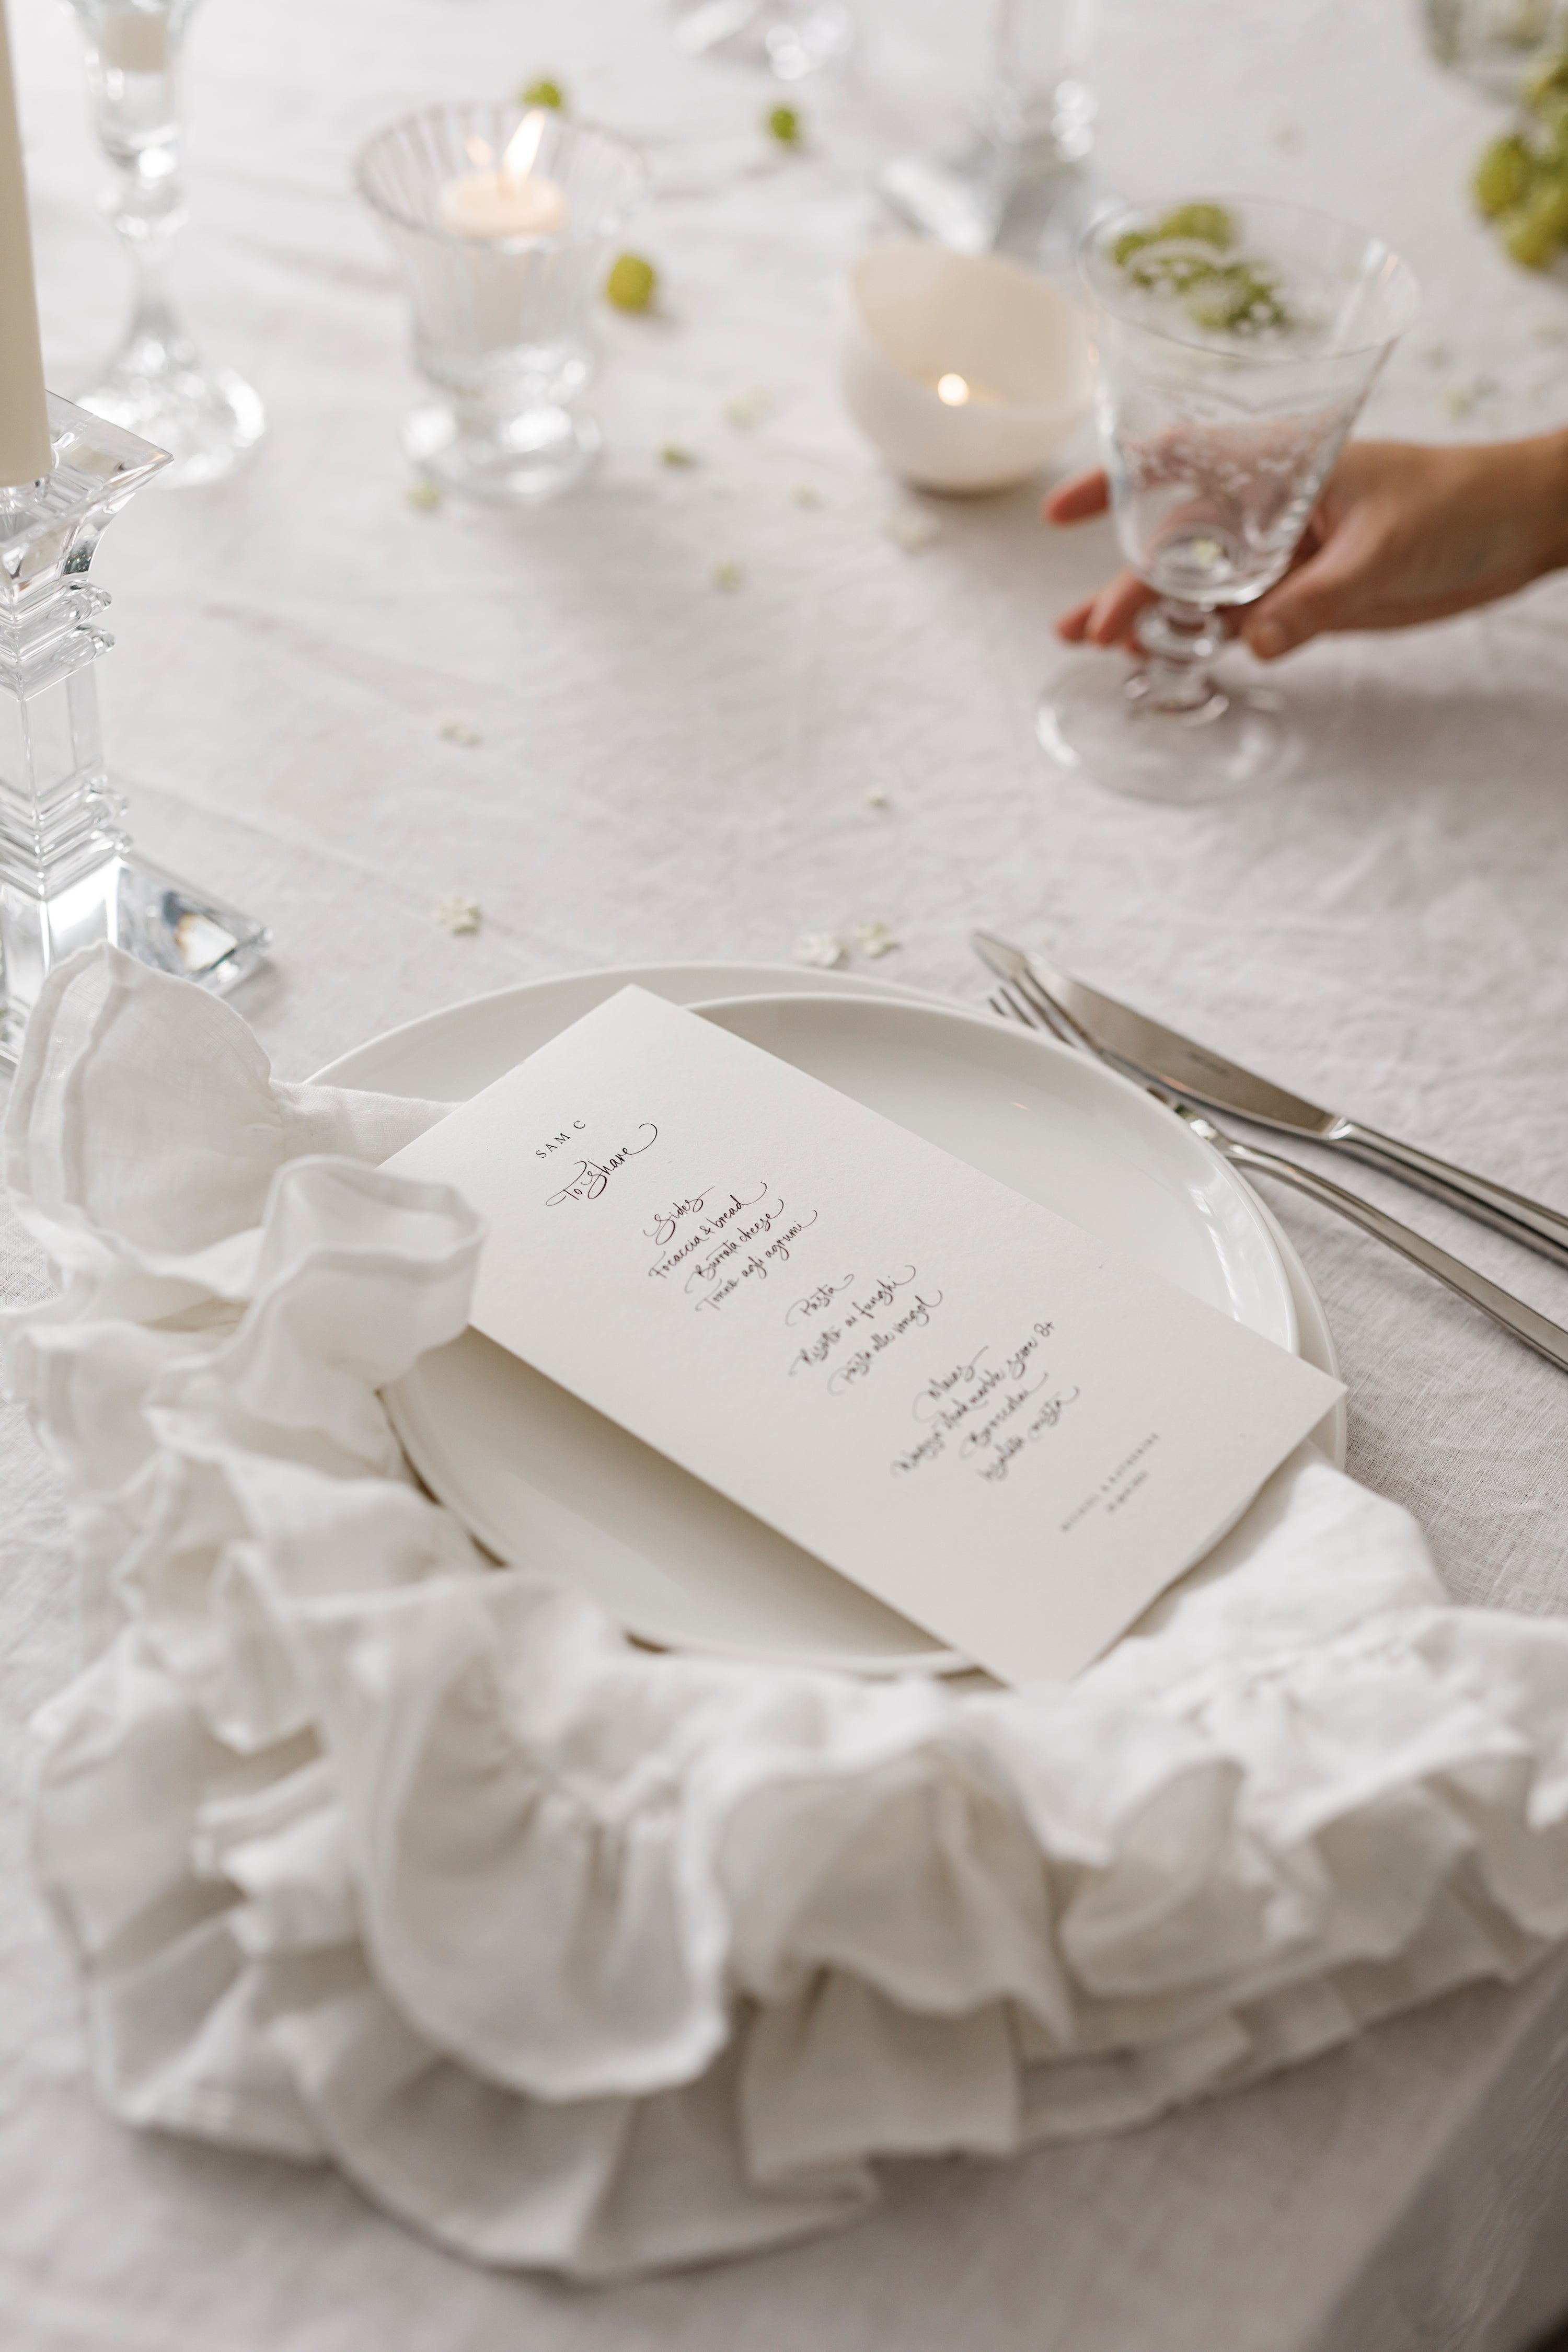 White Ruffled Napkin for Hire | For Love & Living Gold Coast Wedding & Events Hire